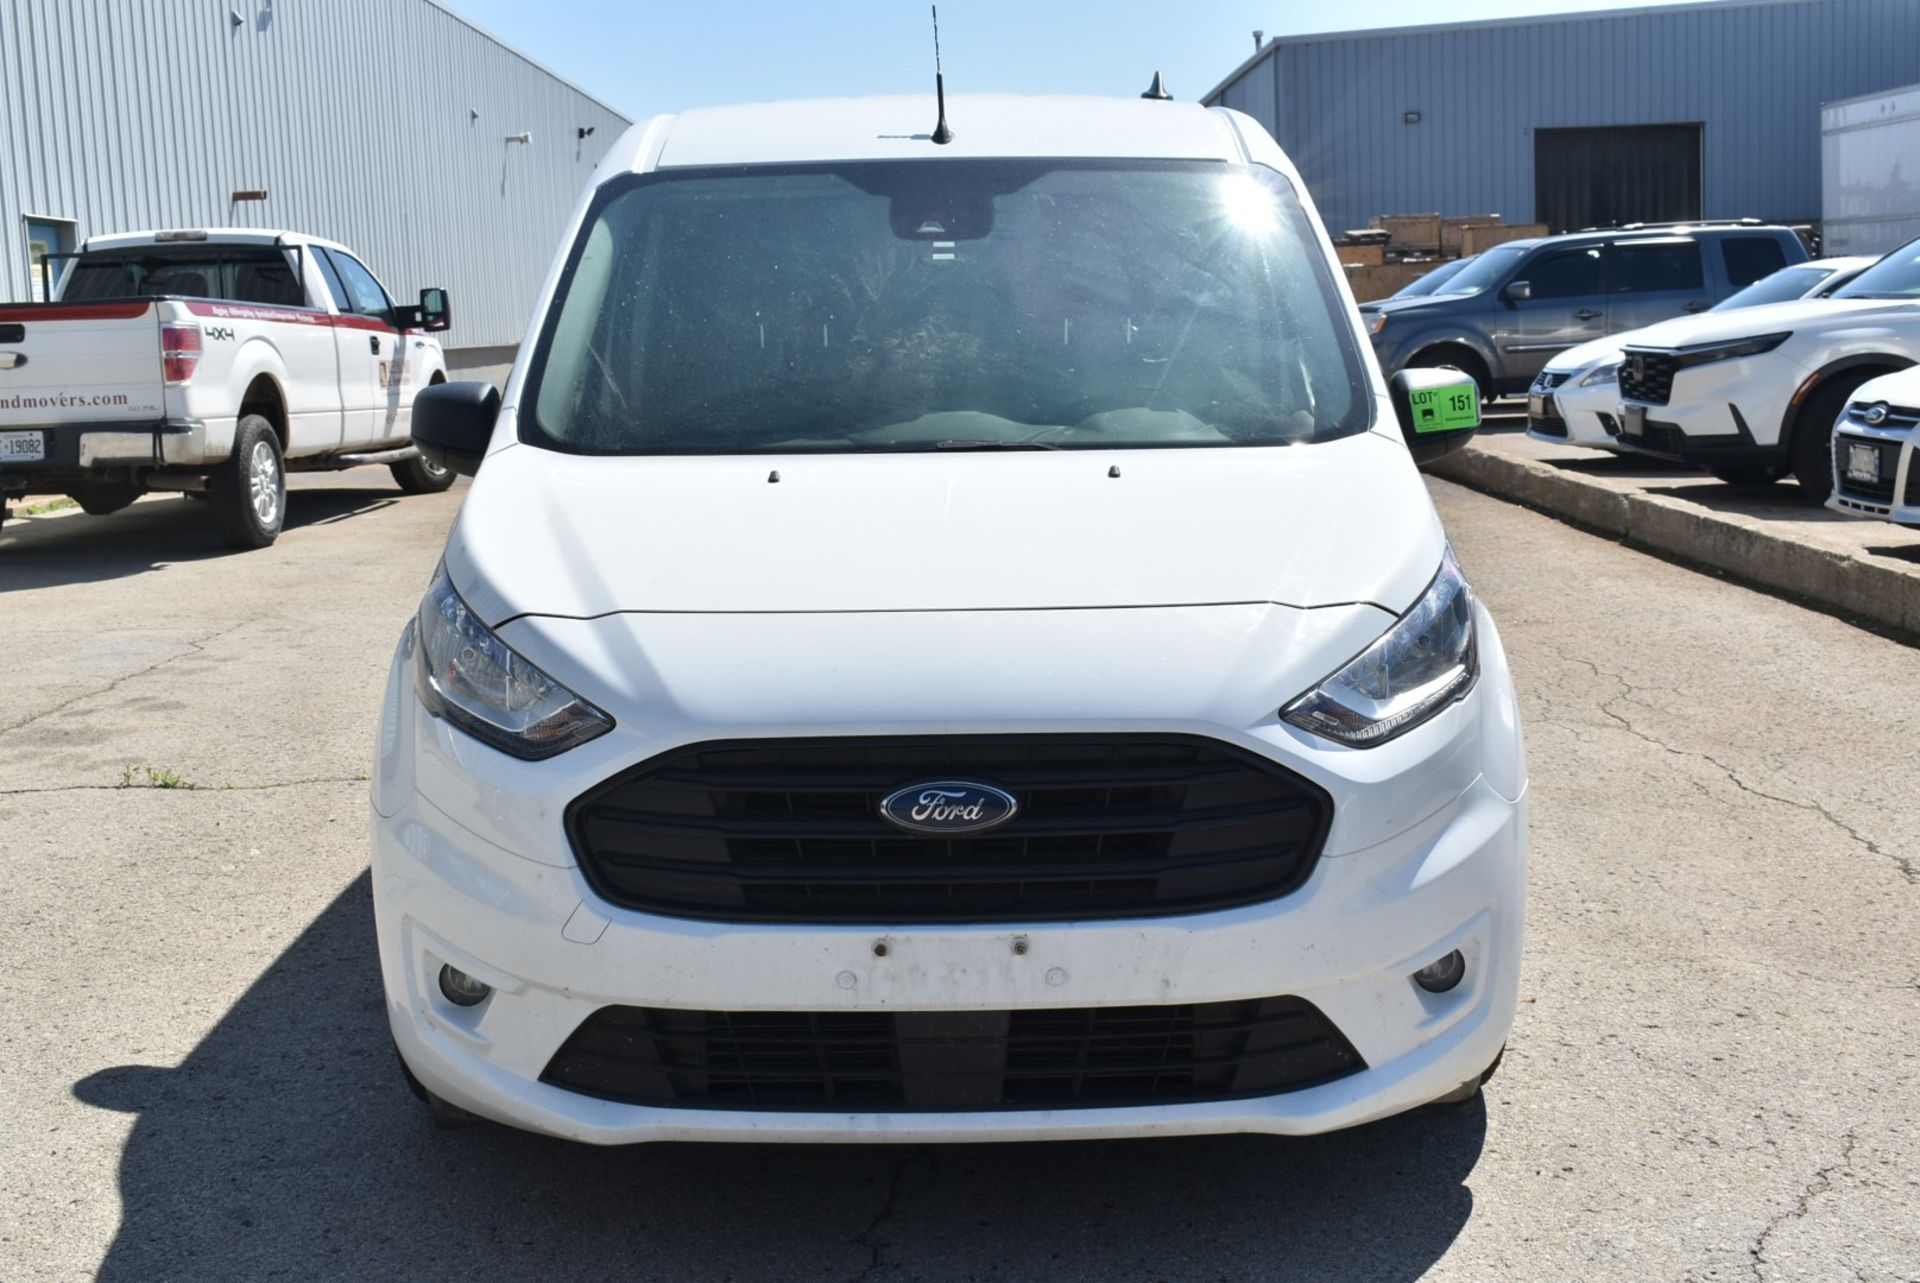 FORD (2020) TRANSIT CONNECT VAN WITH 2.0 LITER 4 CYLINDER GAS ENGINE, AUTOMATIC TRANSMISSION, FWD, - Image 7 of 14